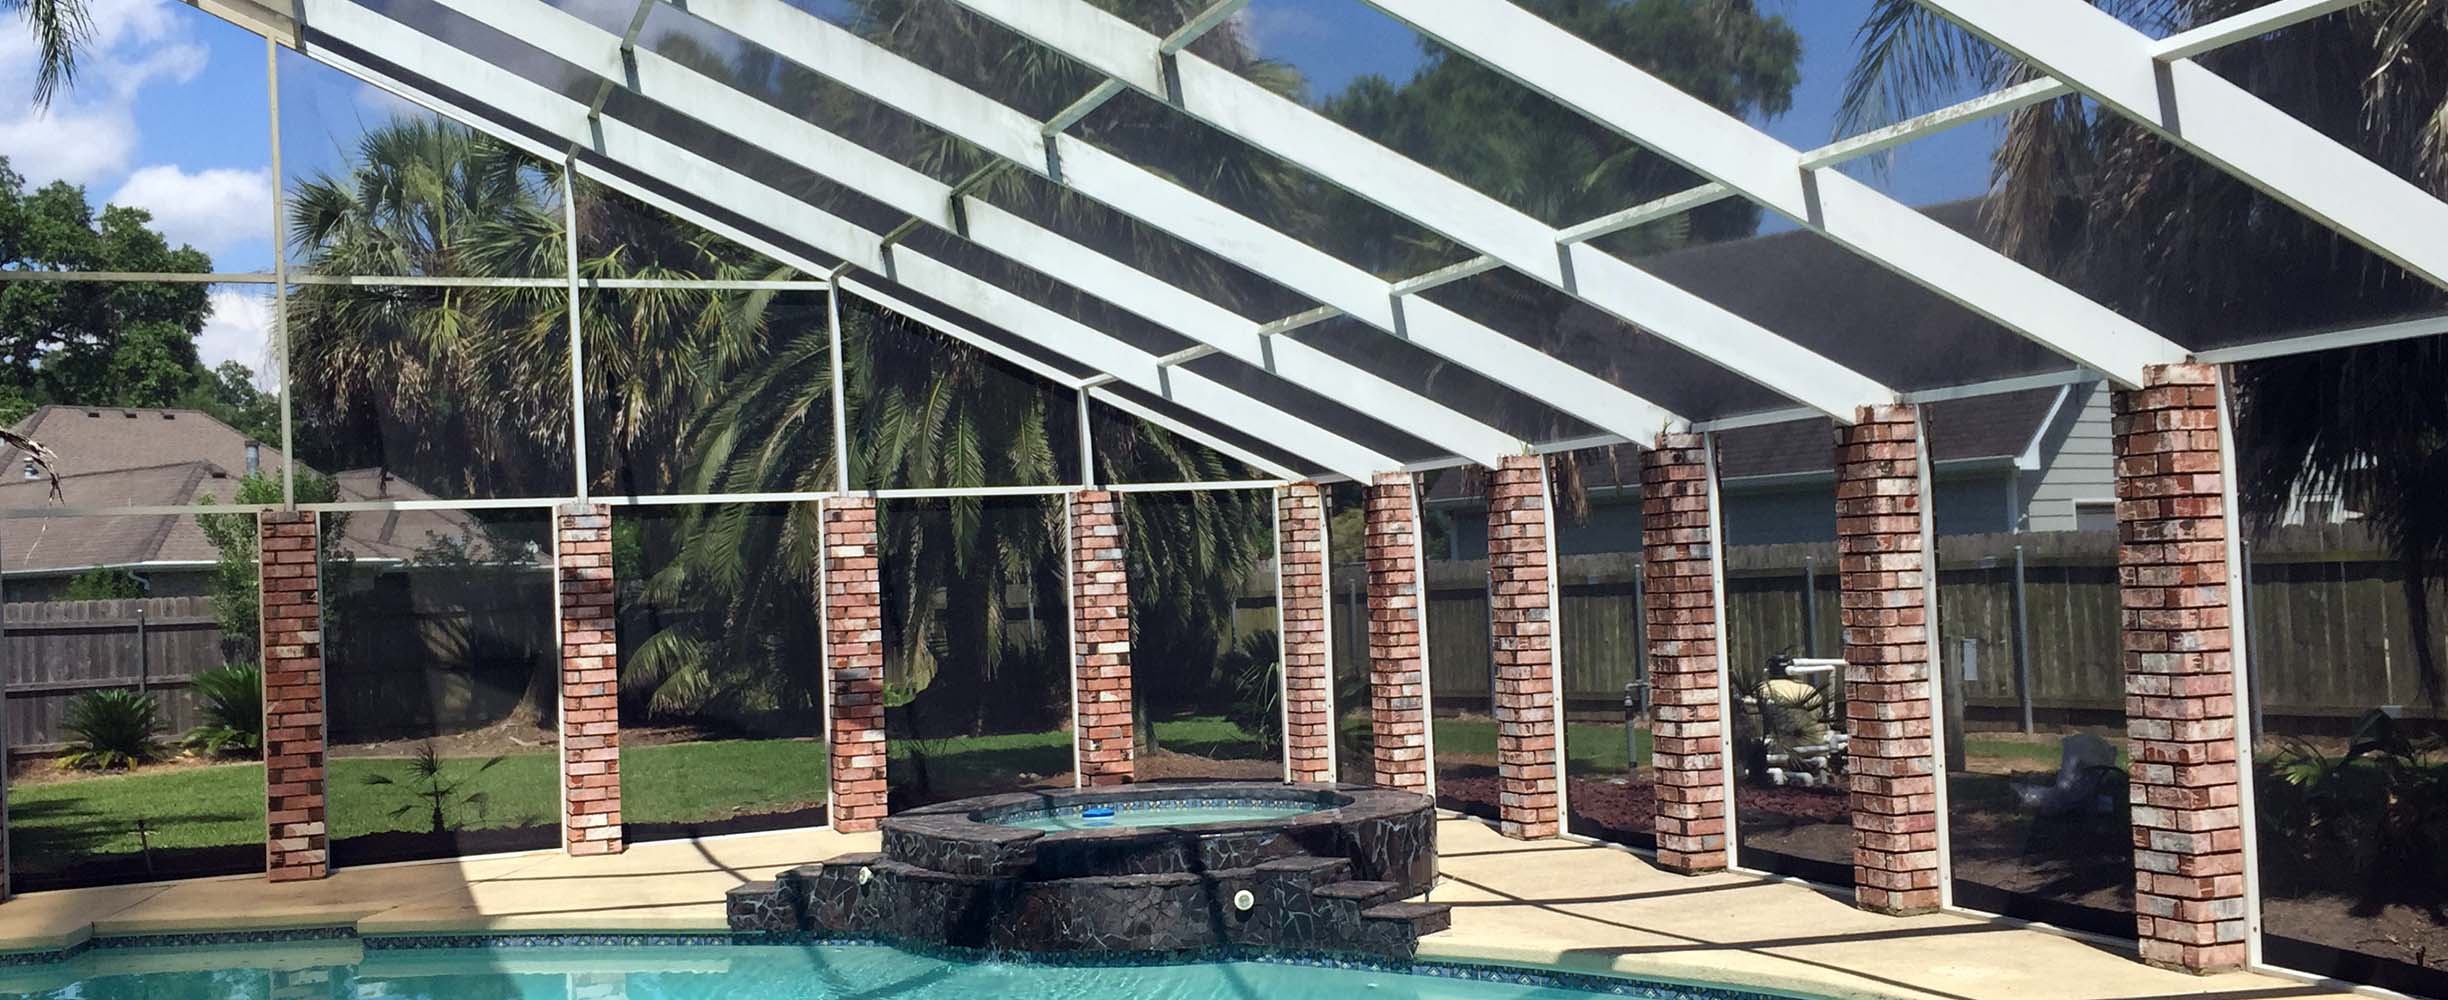 Pool enclosure with aluminum, plastic and glass